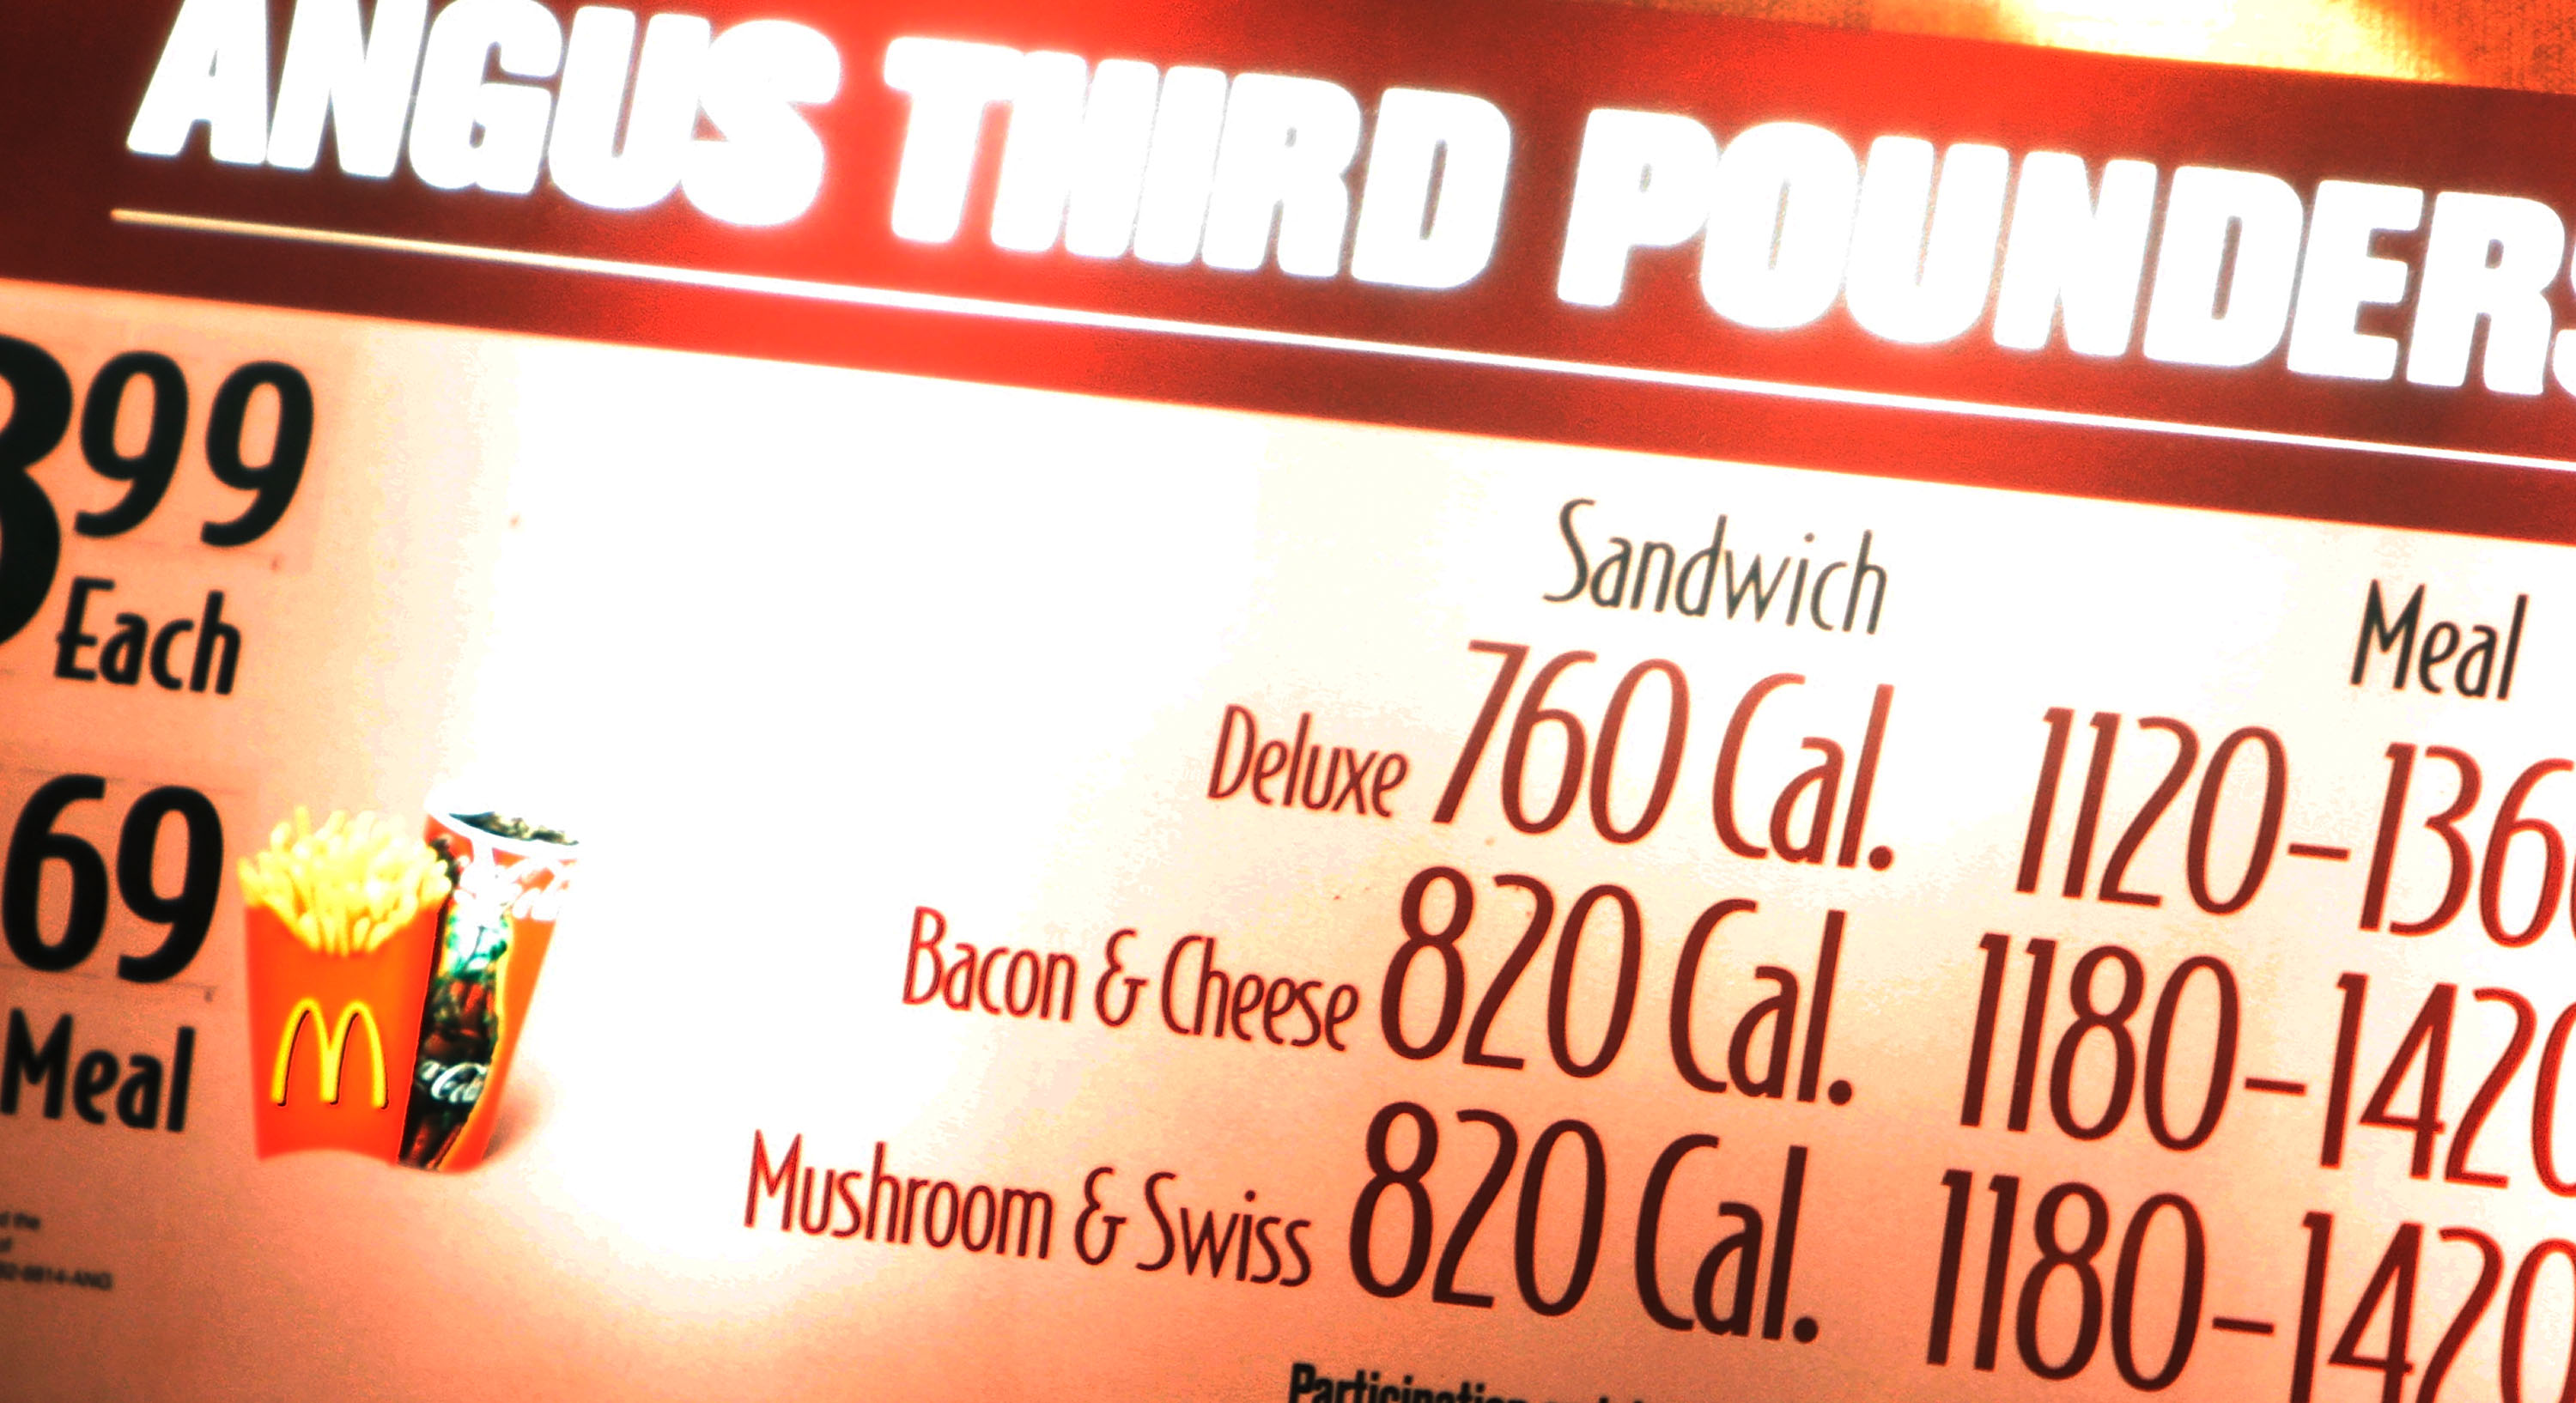 A close-up on the calorie counts listed for angus third pounders on a lit-up McDonald’s menu board.